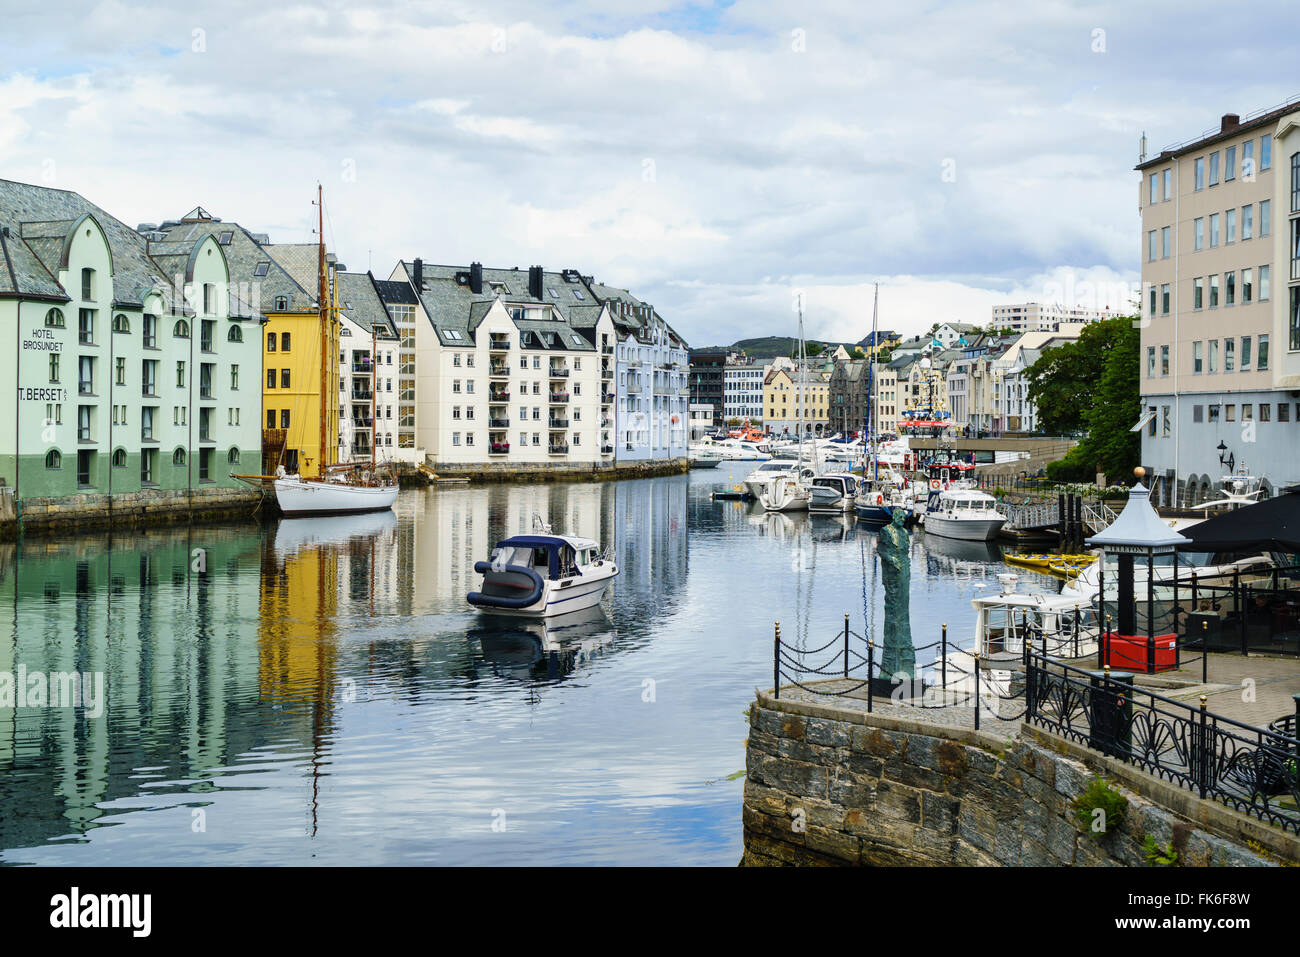 Alesund, noted for its Art Nouveau achitecture, Norway, Scandinavia, Europe Stock Photo